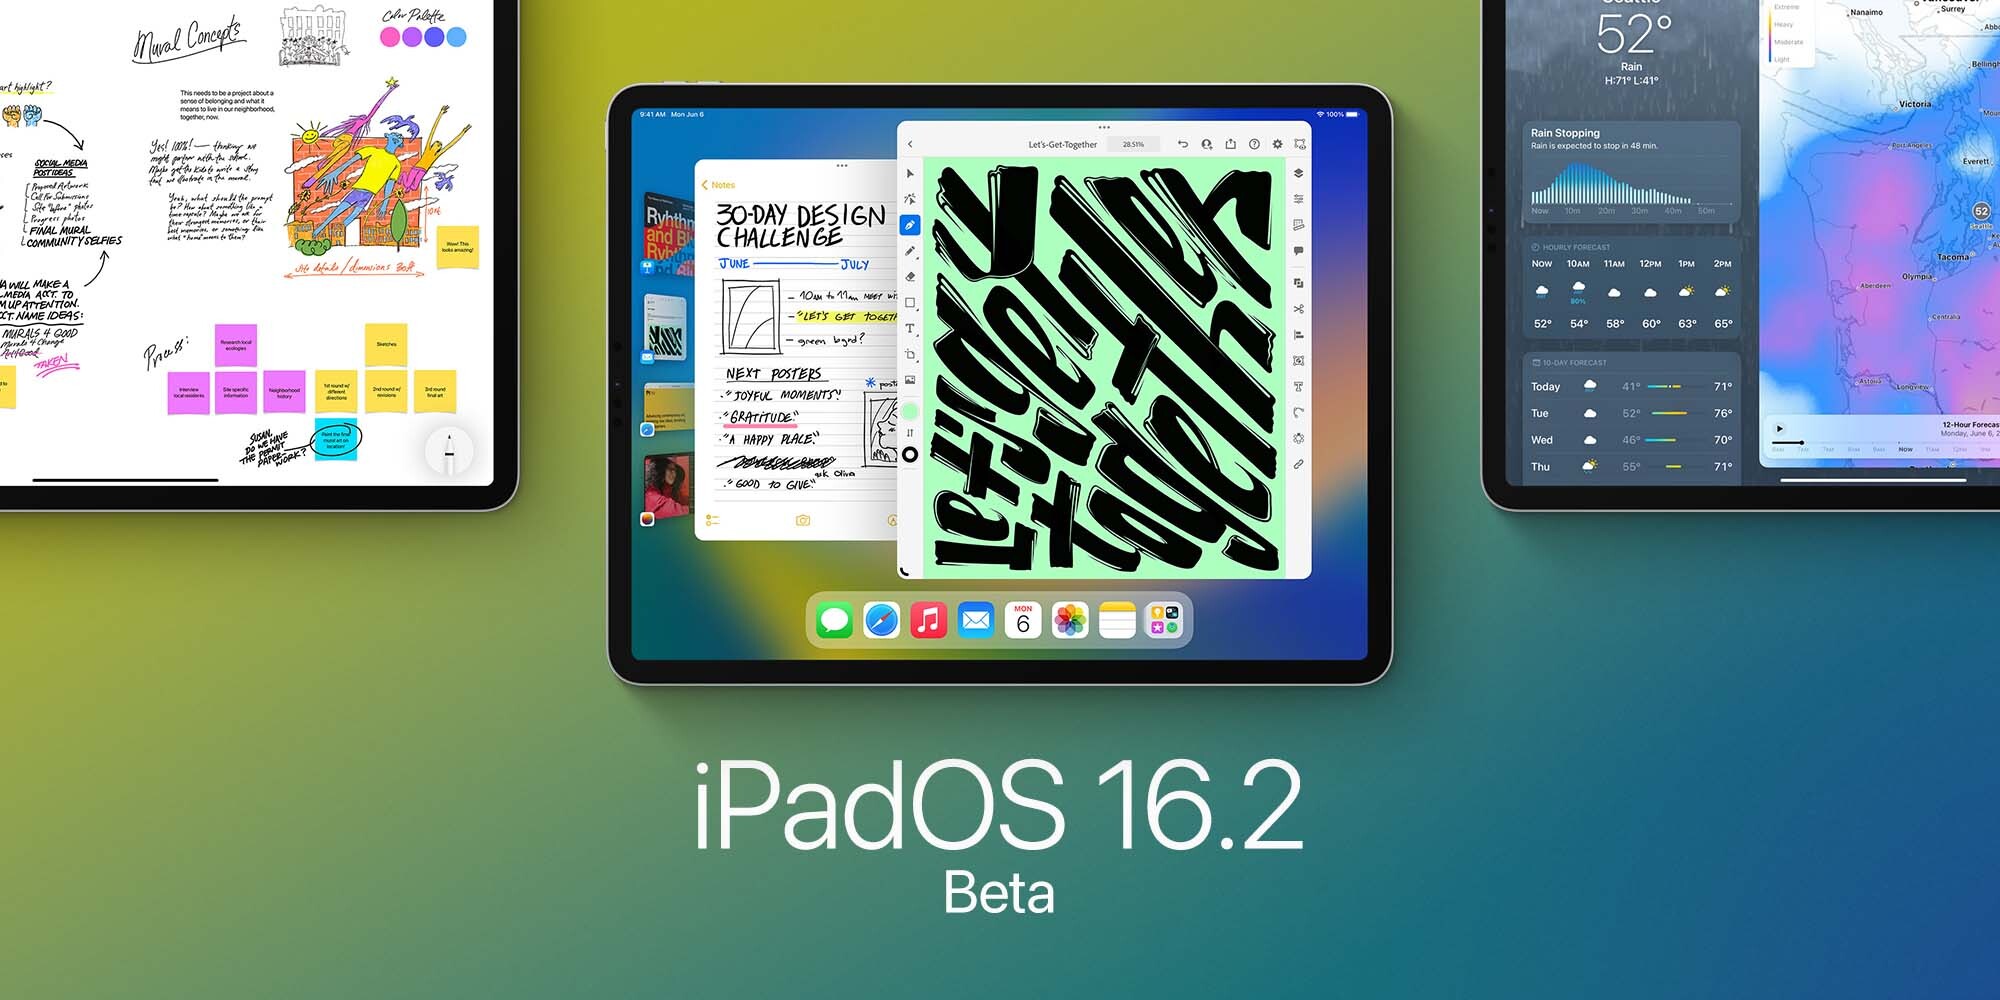 iPadOS 16.2 beta adds Freeform collaboration app, Stage Manager external display support